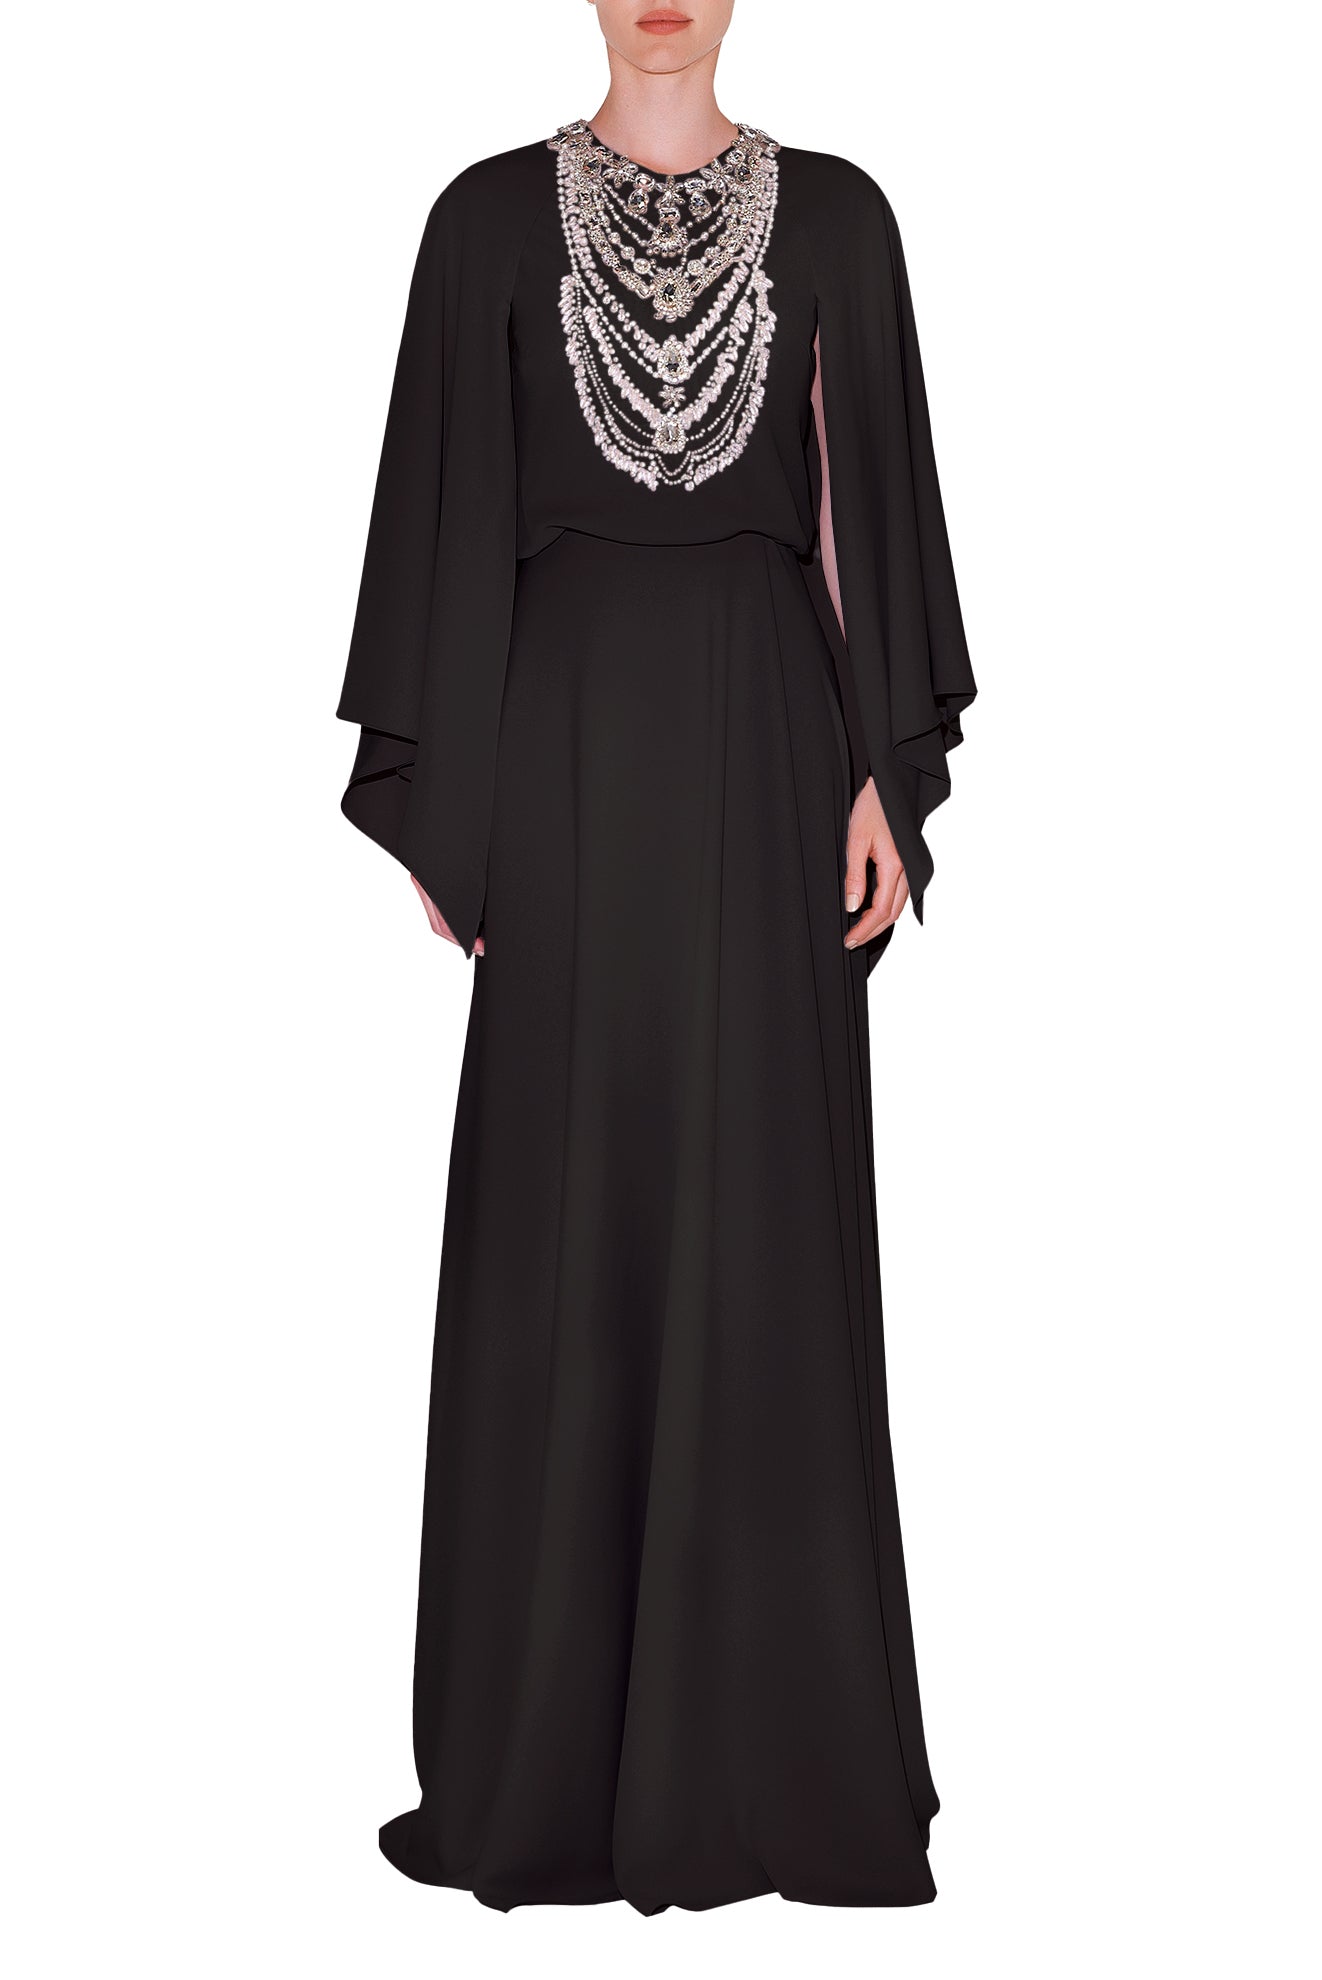 CASCADE SLEEVE, BLOUSON DRESS WITH EMBROIDERED NECKLACE DETAIL